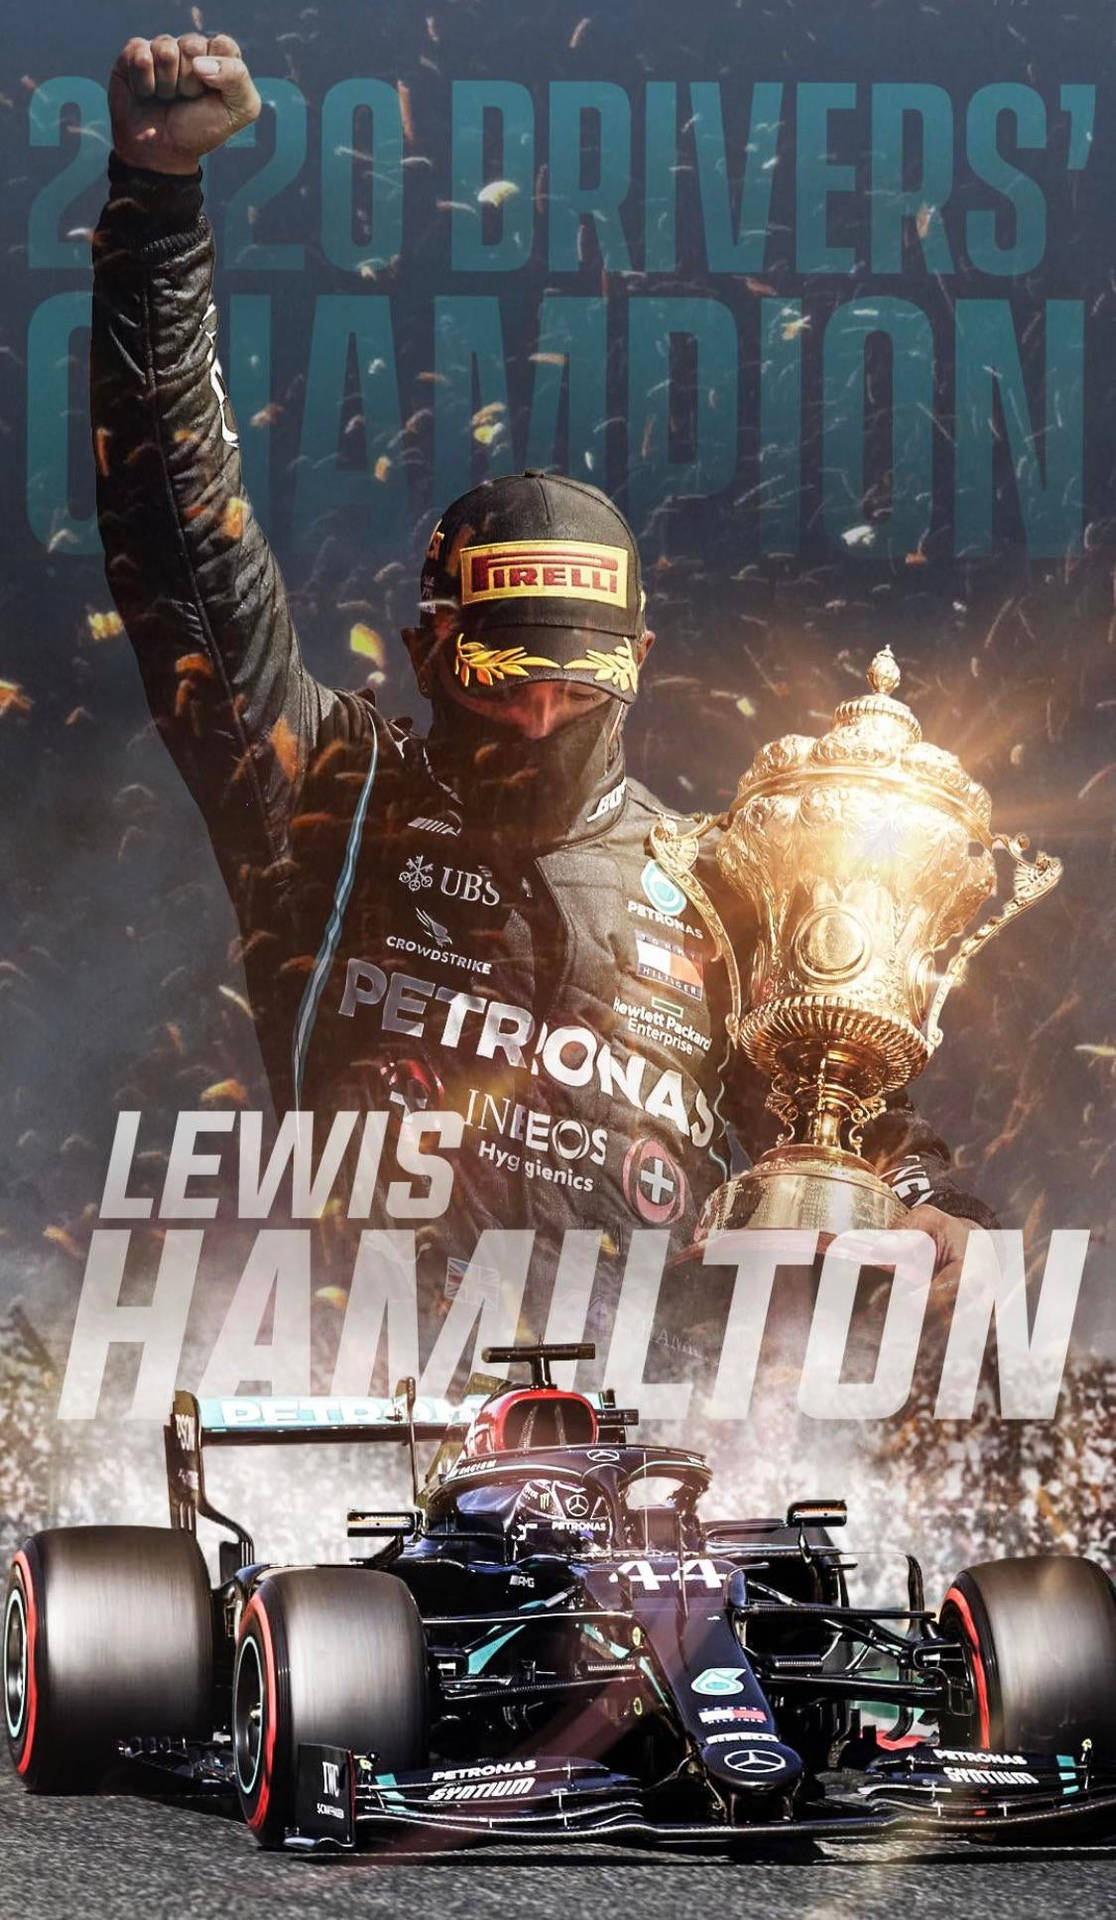 Lewis Hamilton Is The Driver For The 2020 Drivers' Champion Wallpaper